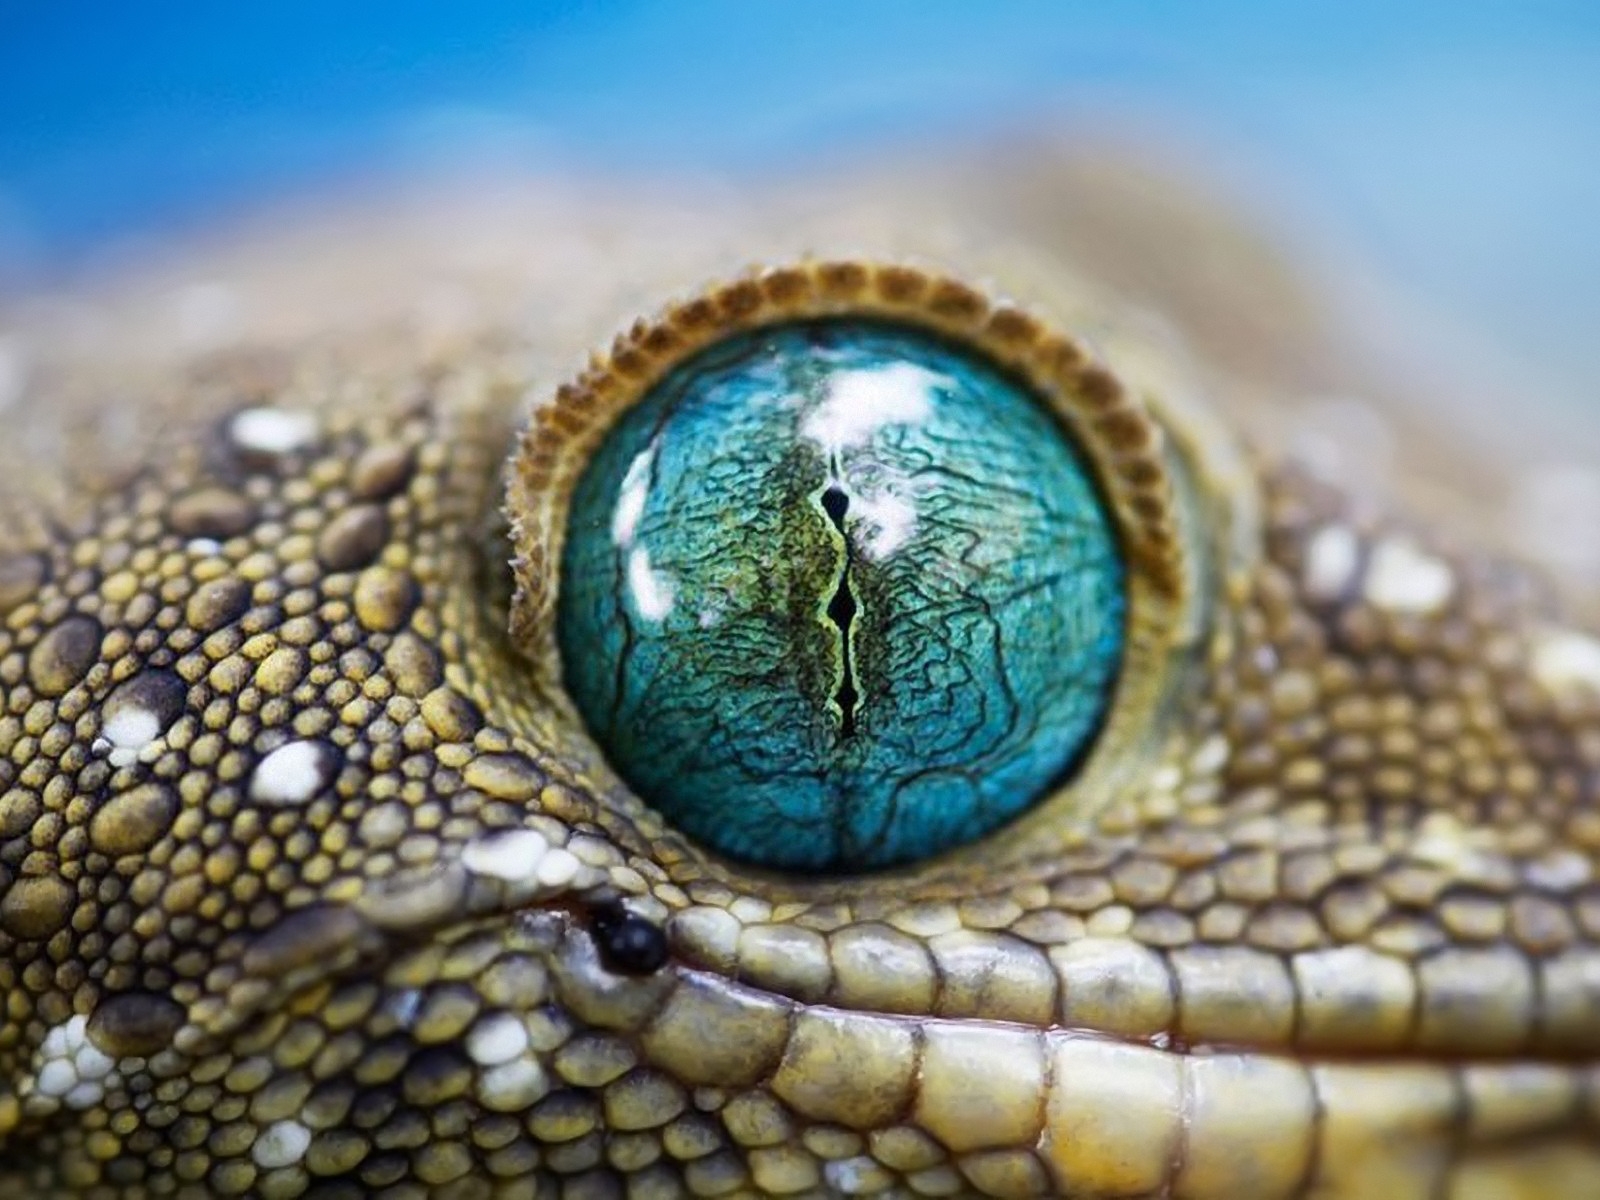 Blue Reptile Eye for 1600 x 1200 resolution